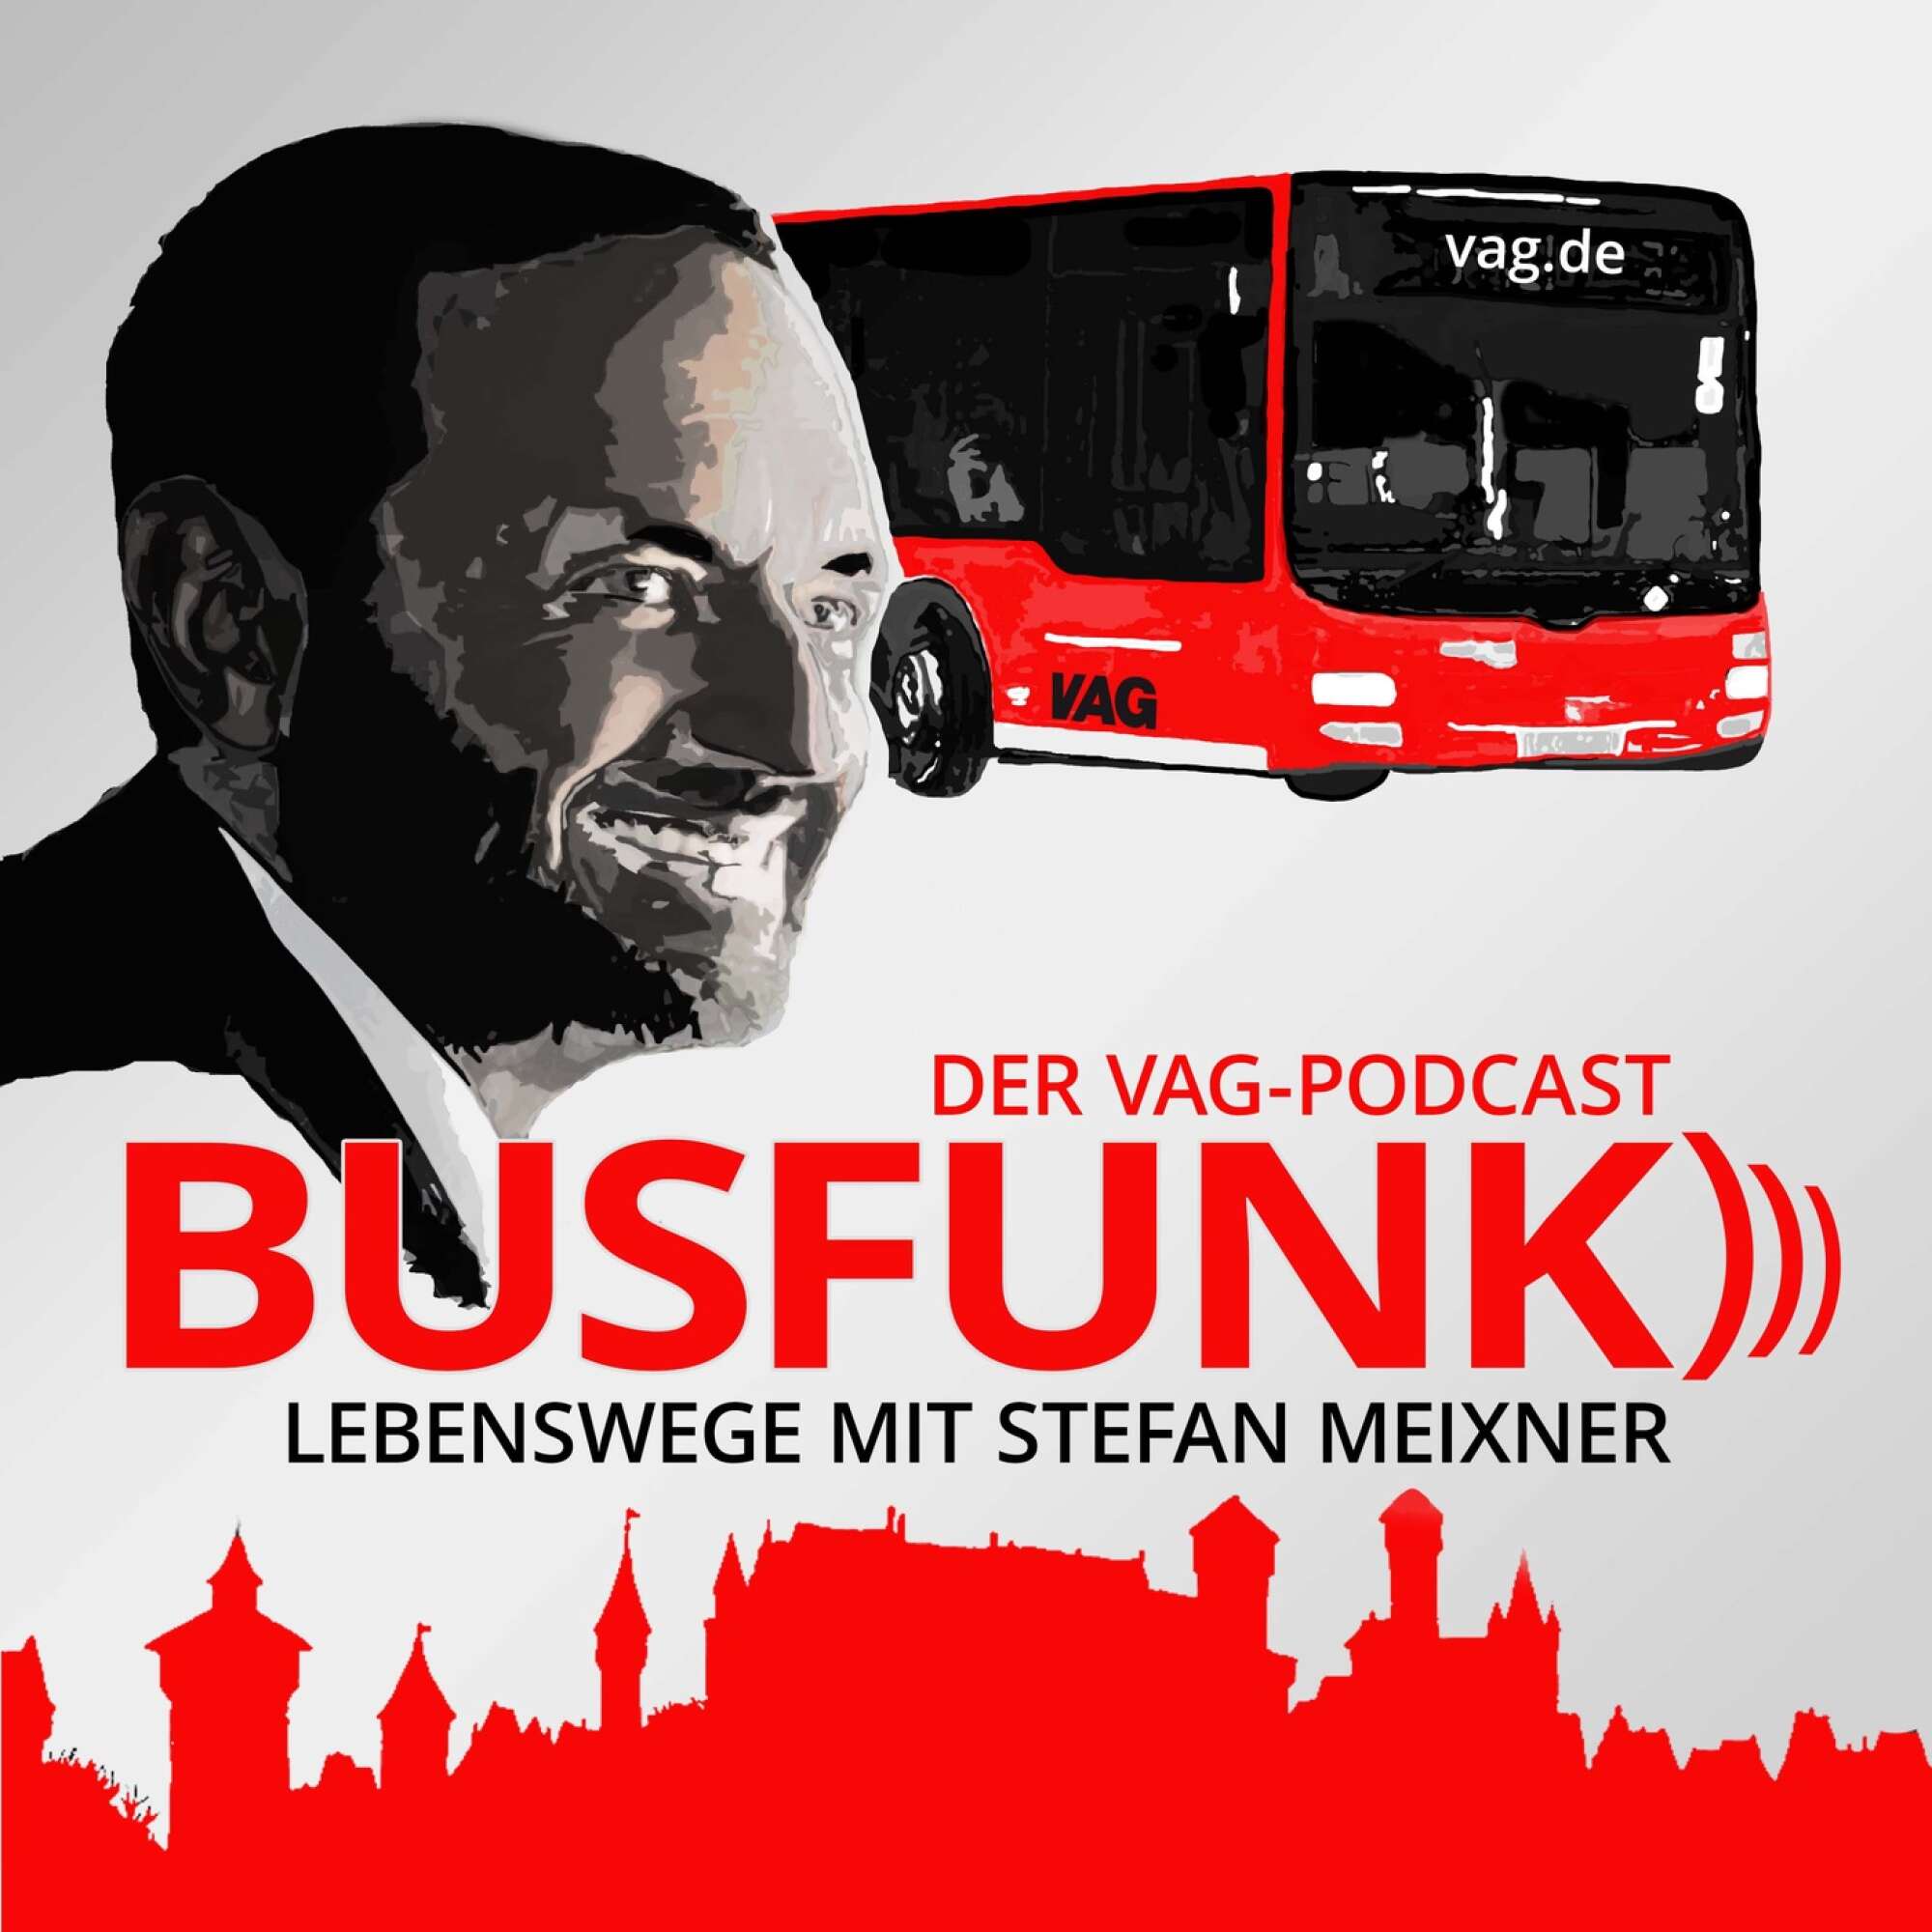 Podcast-Cover "Busfunk"